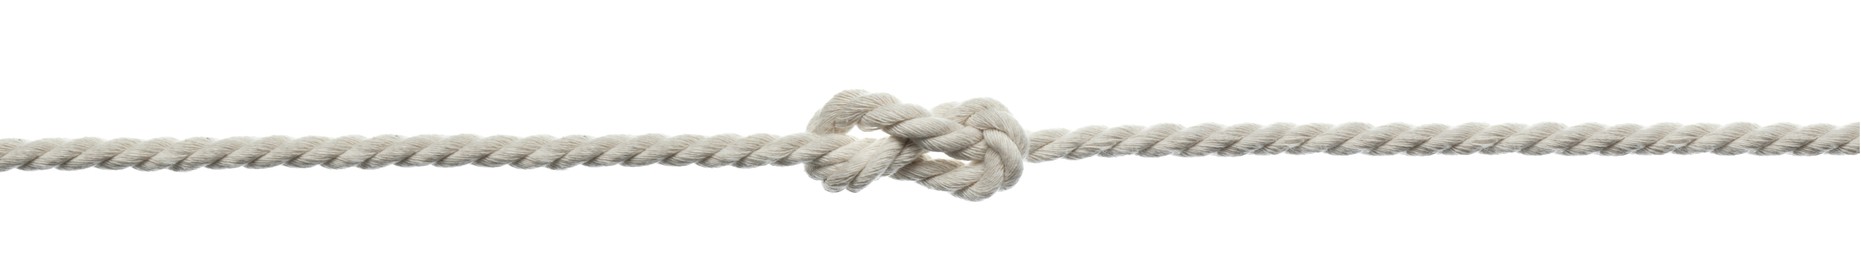 Image of Durable cotton rope with knot on white background